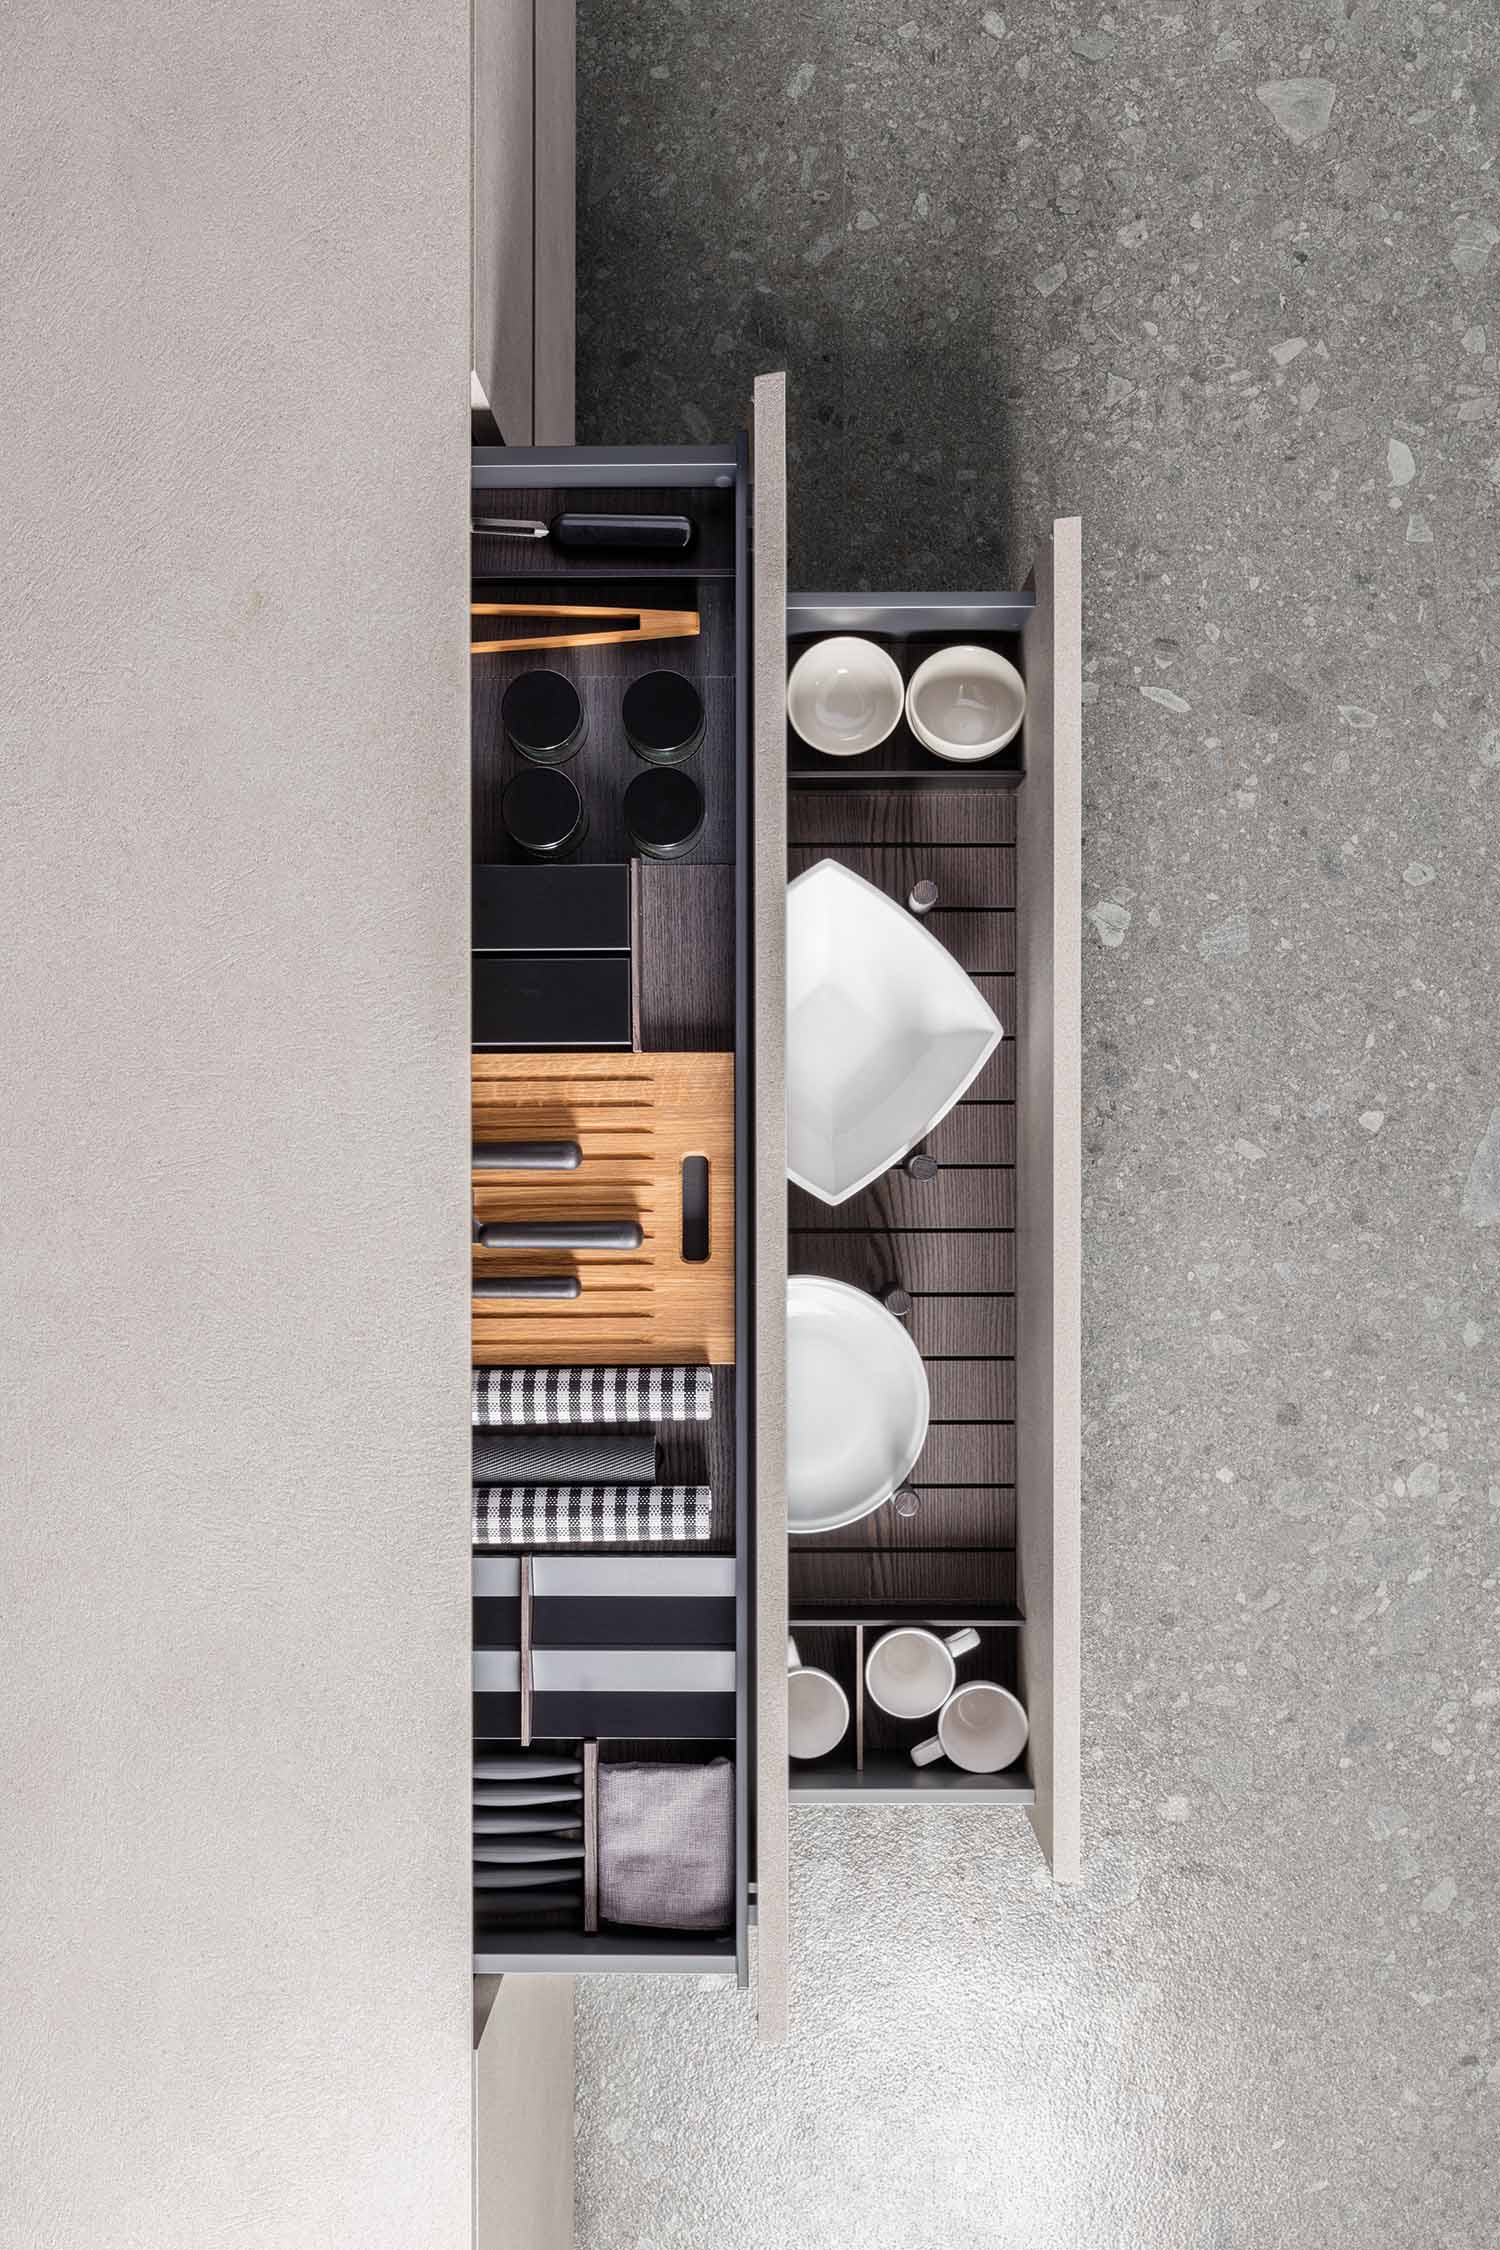 Freely positioned cutlery dividers for the kitchen drawer units, to contain all manner of kitchen accessories and utensils.